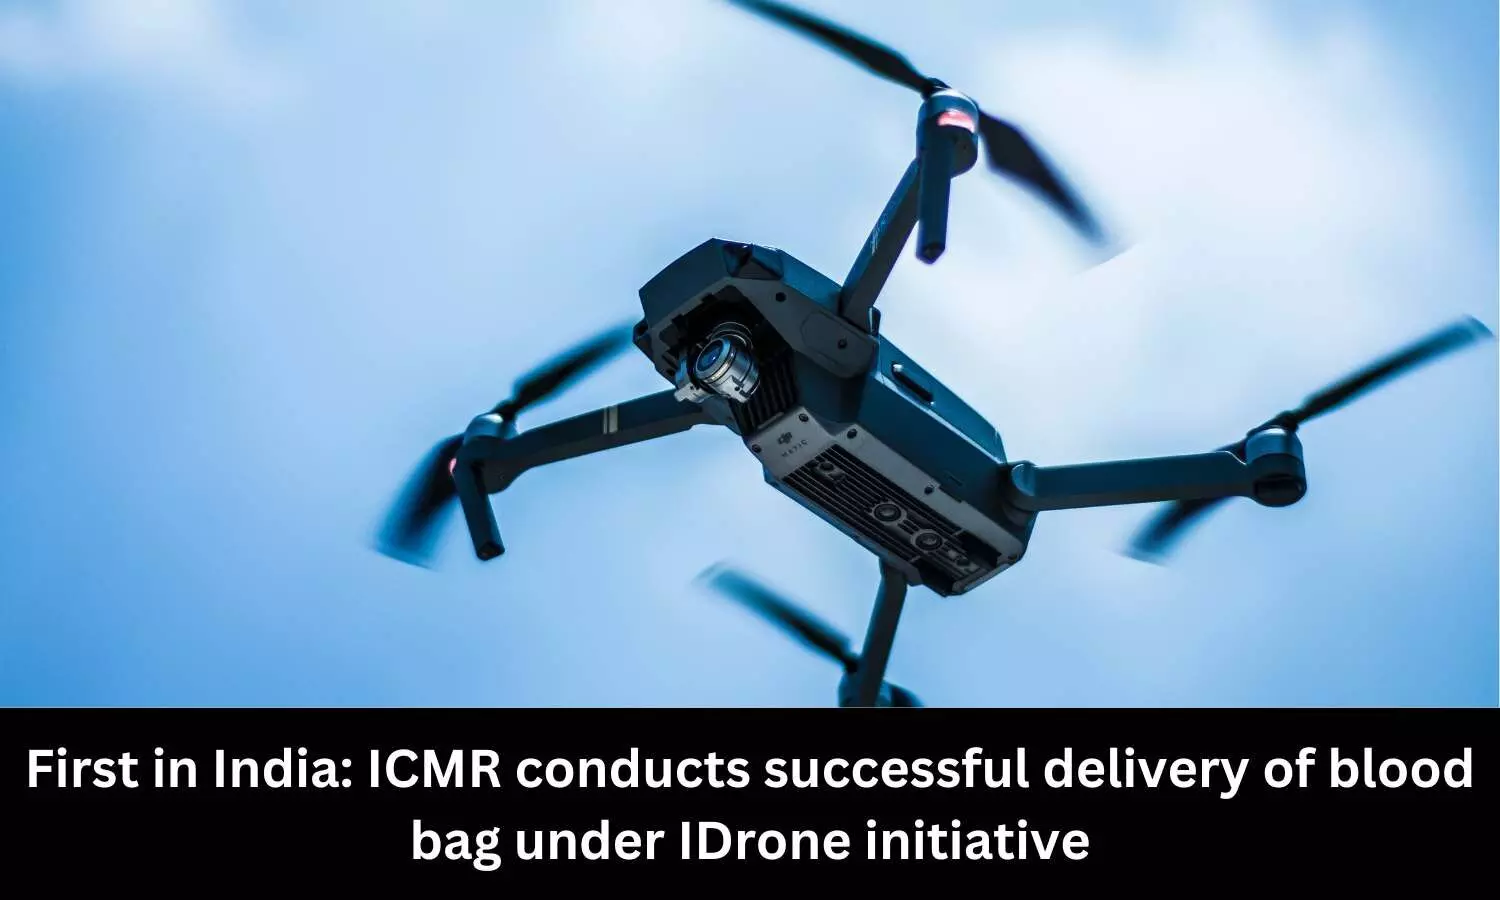 ICMR conducts successful delivery of blood bag under IDrone initiative